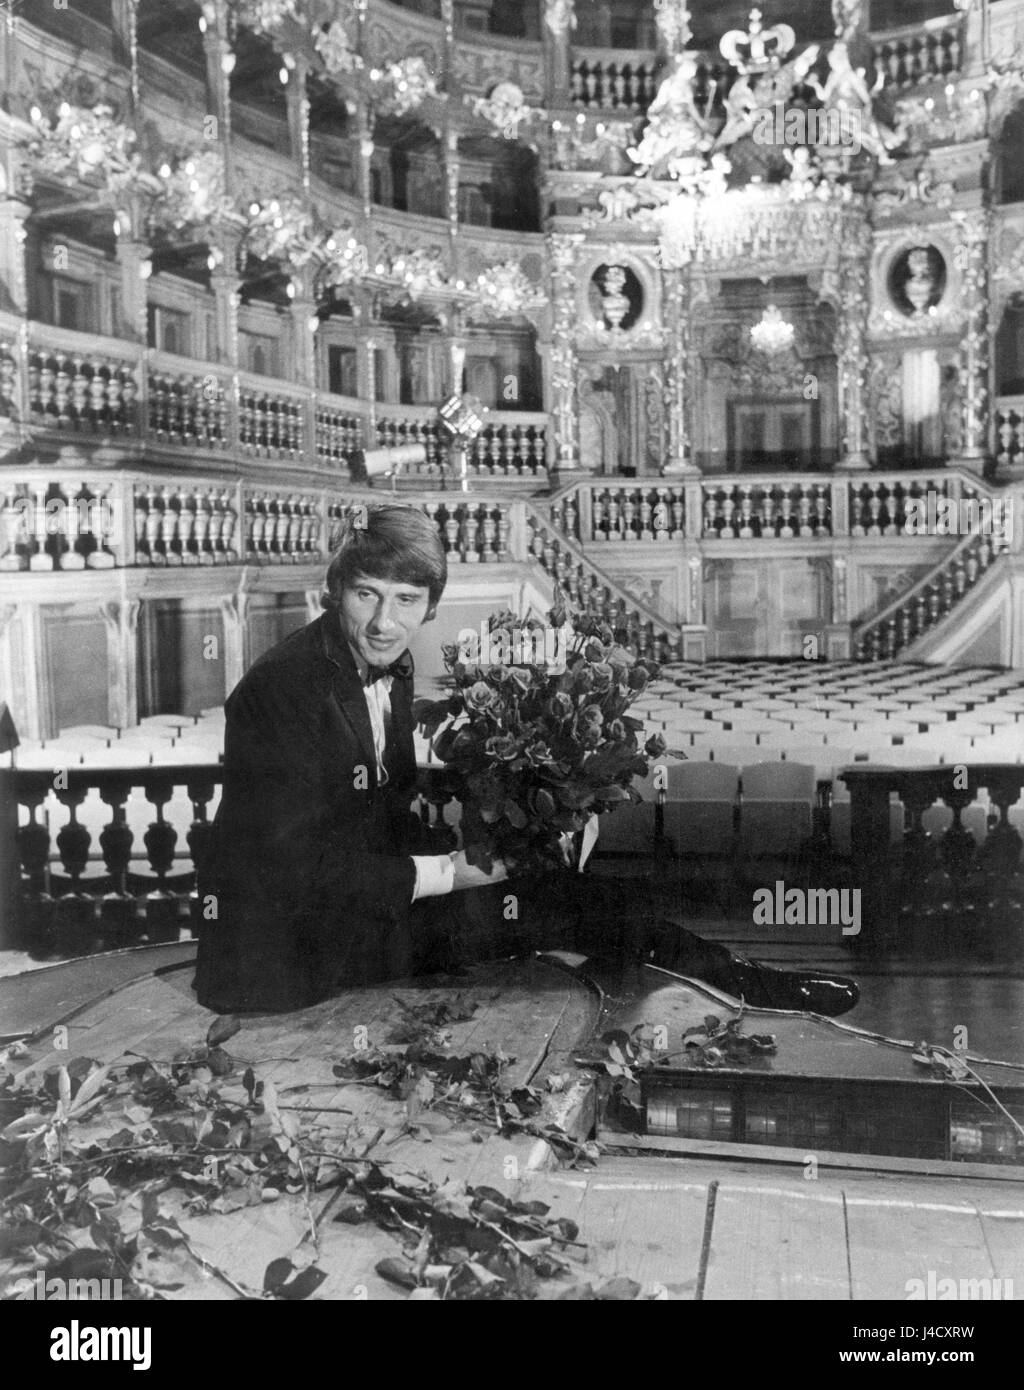 Austrian singer Udo Juergens sits on a prompt box with piles of flowers at the opera house in Bayreuth (Bavaria, Germany) on 3 Septemer 1969.  | usage worldwide Stock Photo